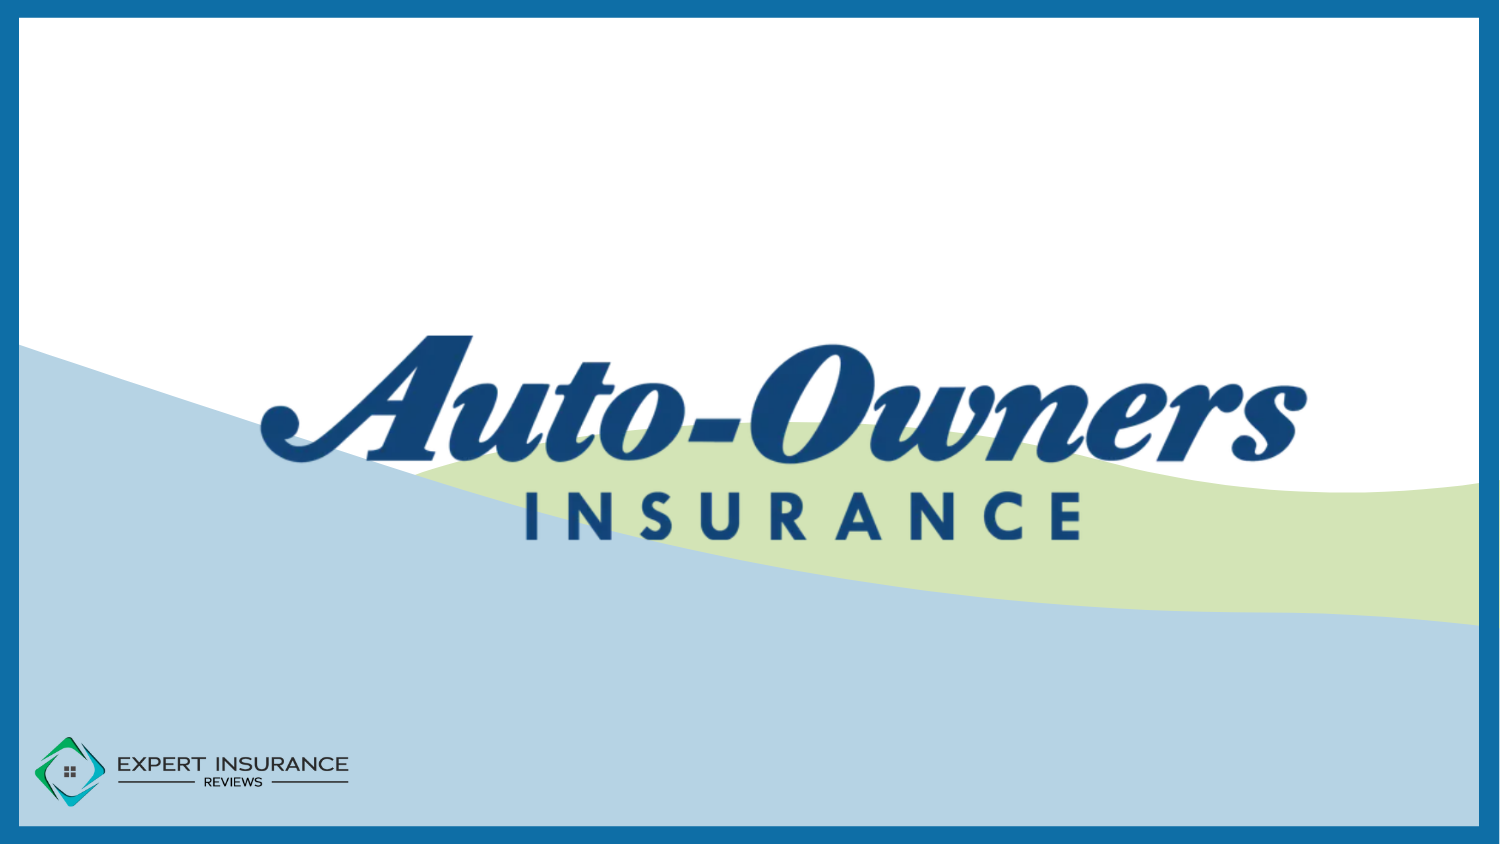 Auto-Owners: Best Home Insurance for Seniors